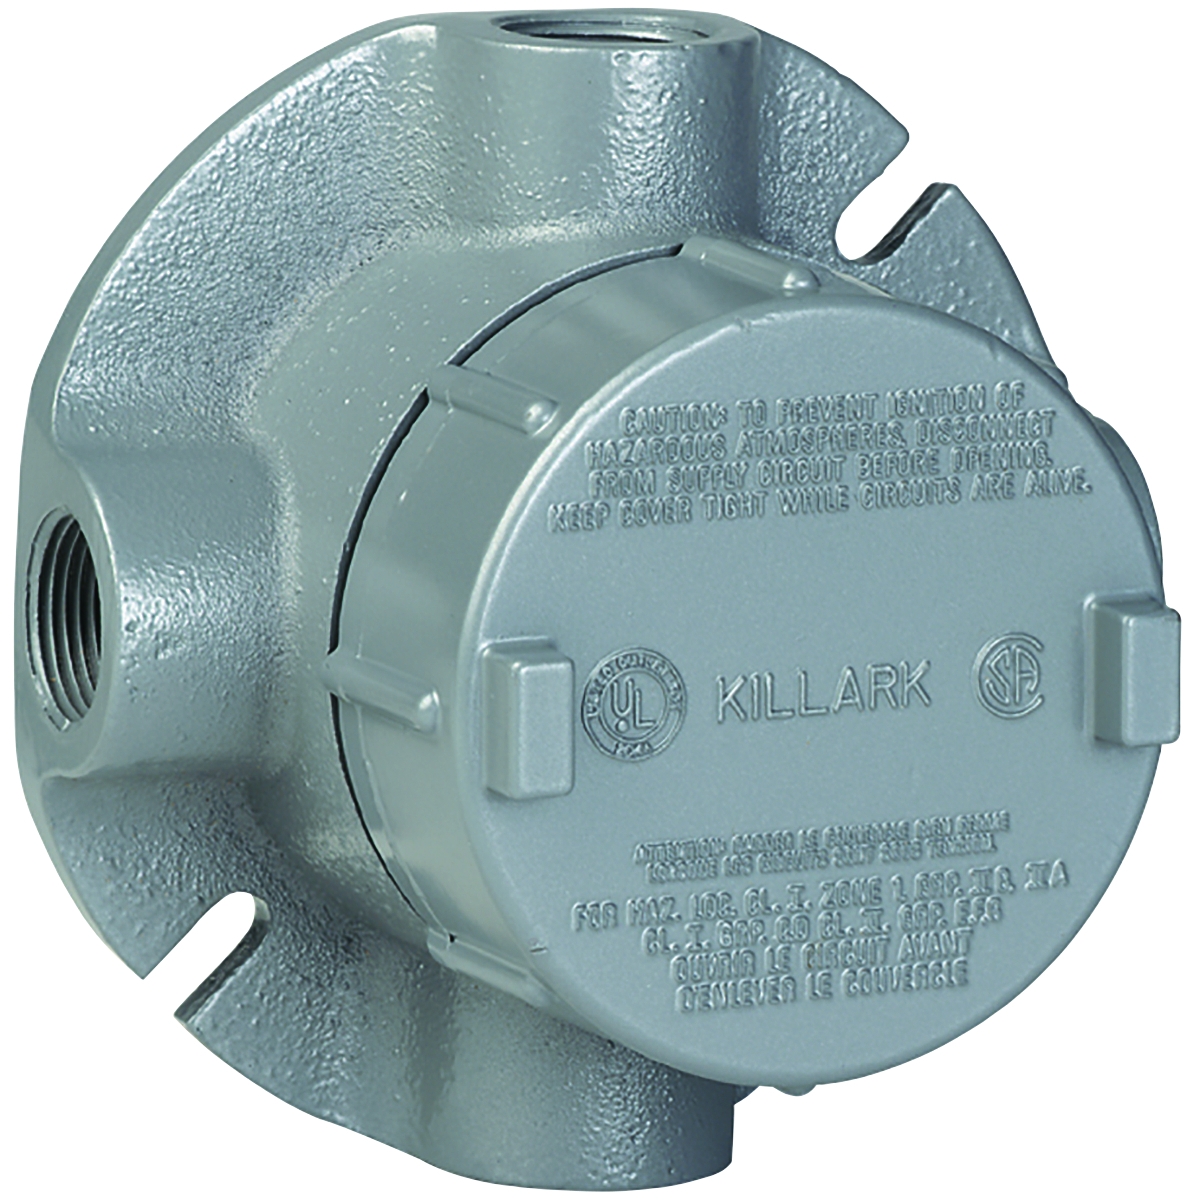 GEC SERIES FITTINGS - IRON - OUTLET BODIES WITH MOUNTING FLANGE - XTFTYPE OUTLET BODY - HUB SIZE 1/2 IN - VOLUME 19.0 CU IN